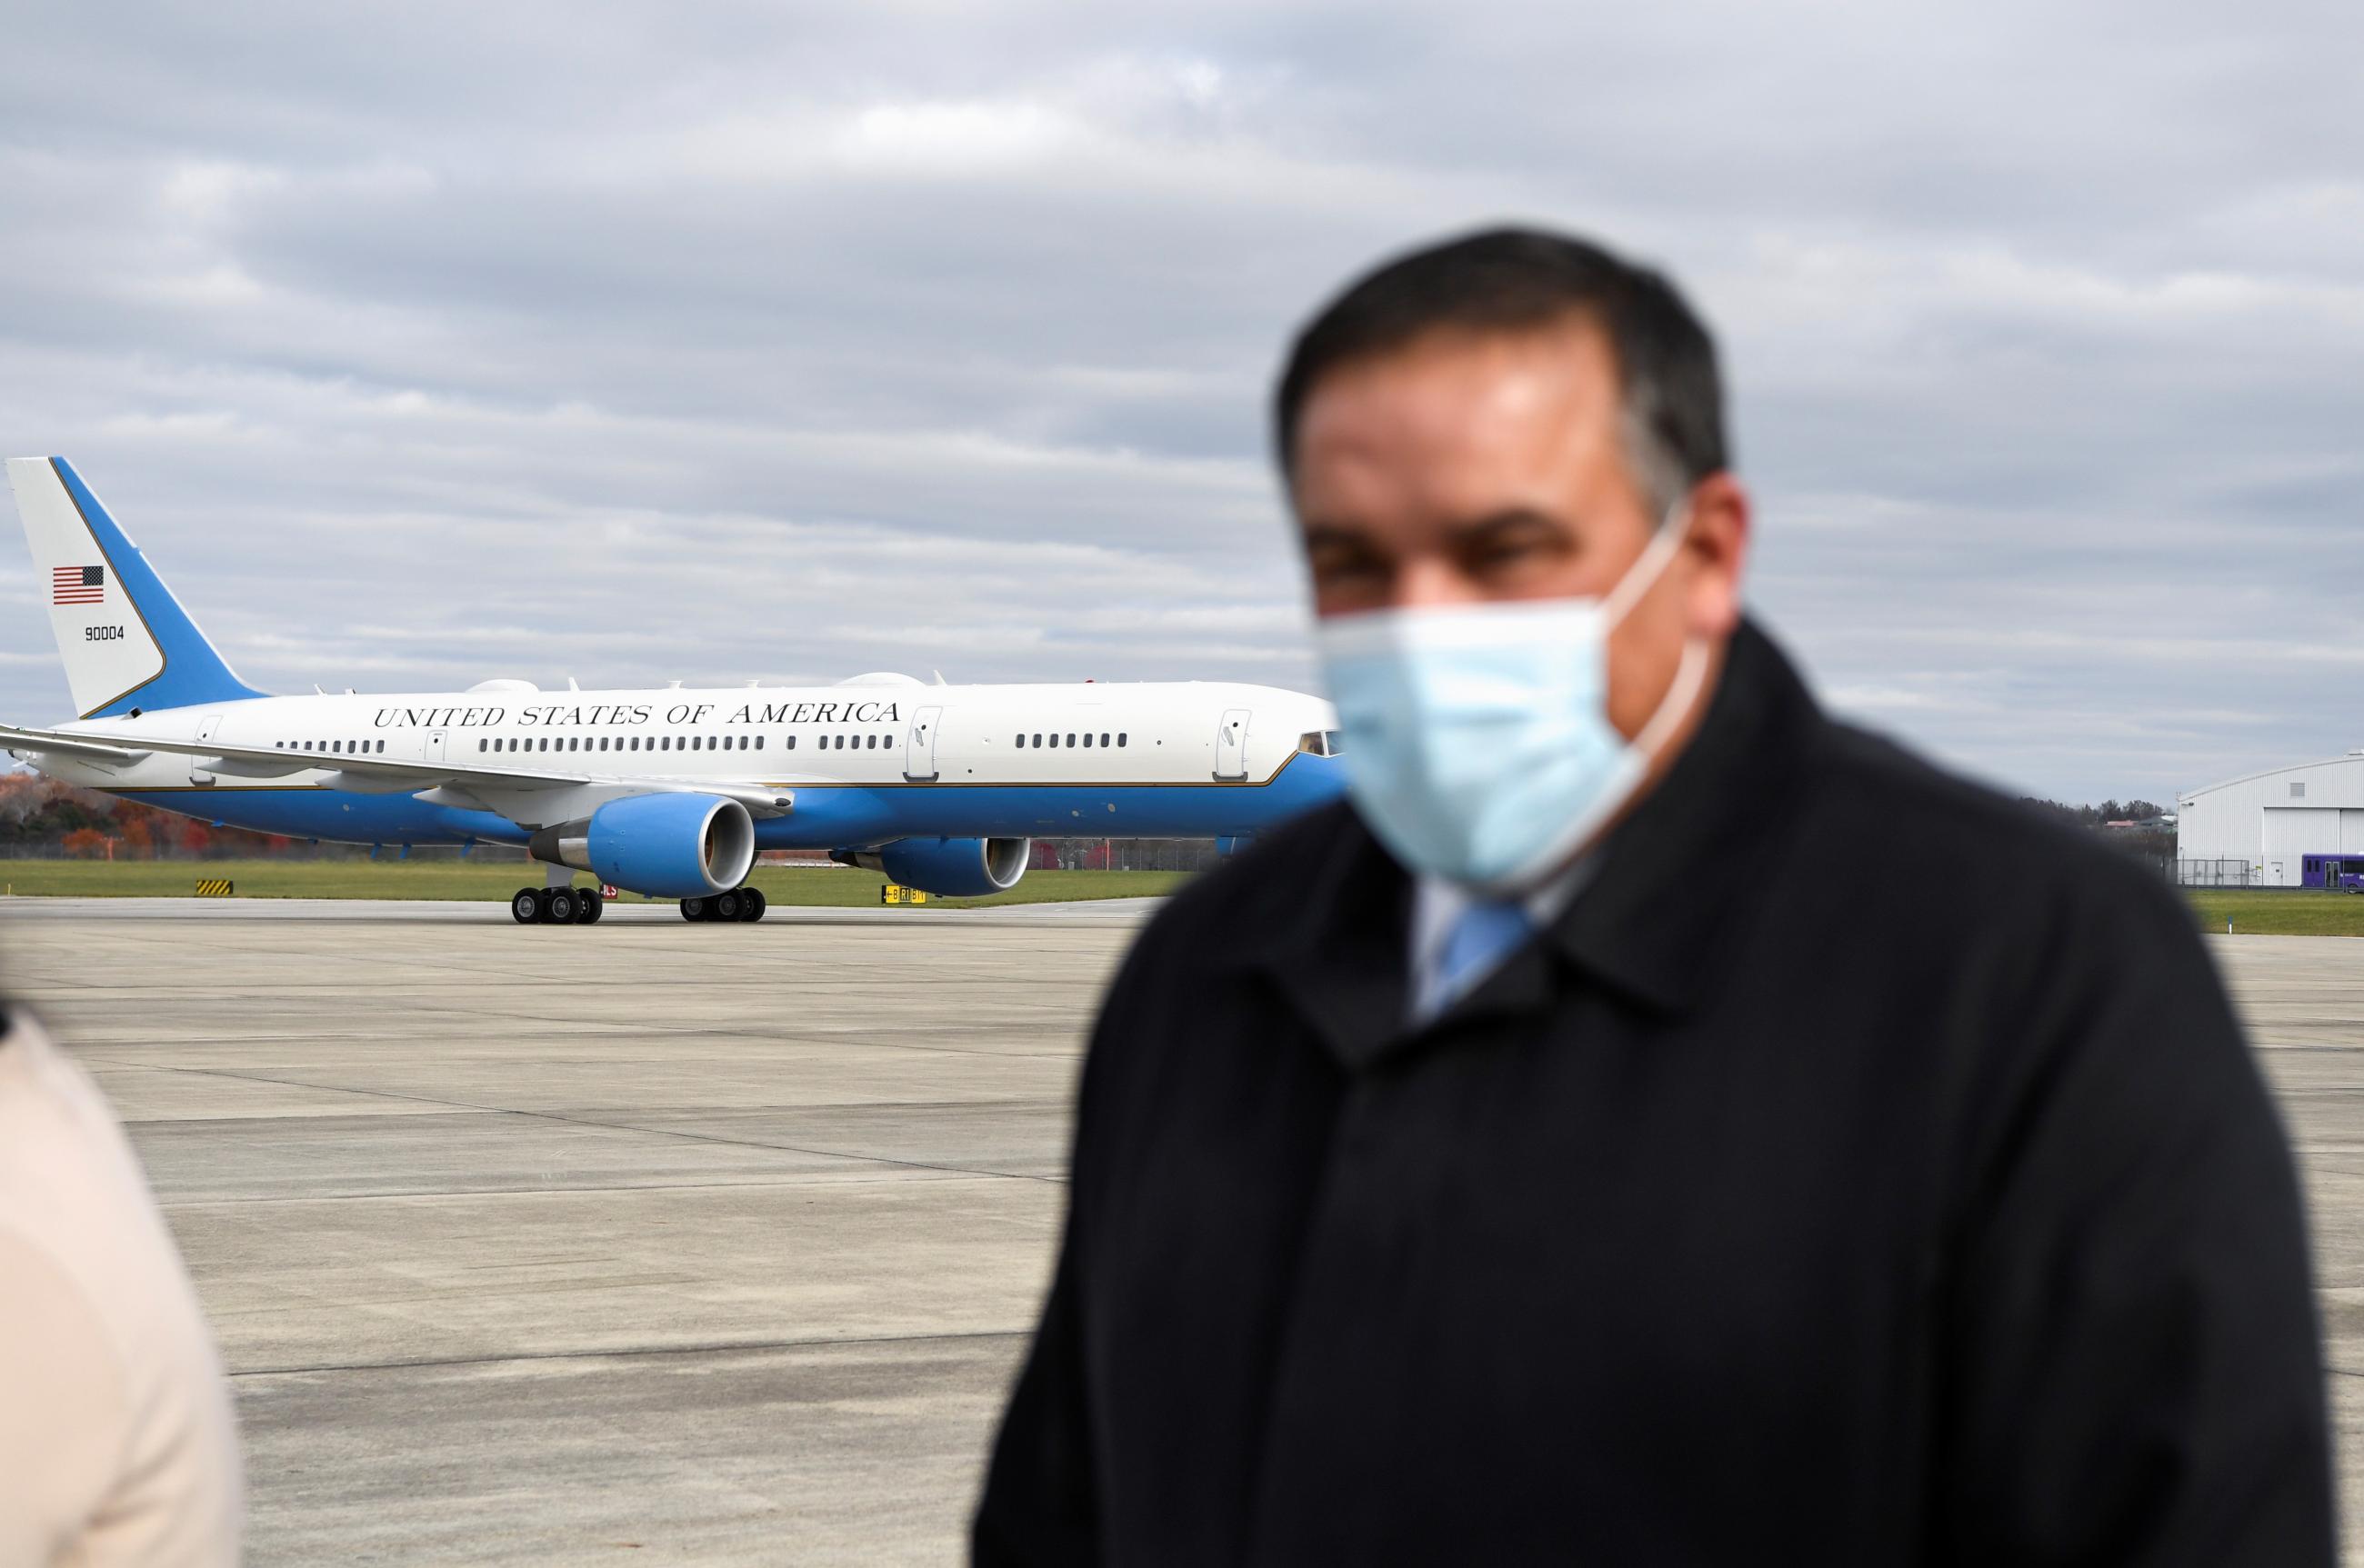 Columbus Mayor Andrew Ginther waits to welcome U.S. Vice President Kamala Harris as she arrives aboard Air Force Two at John Glenn Columbus International Airport, in Columbus, Ohio.